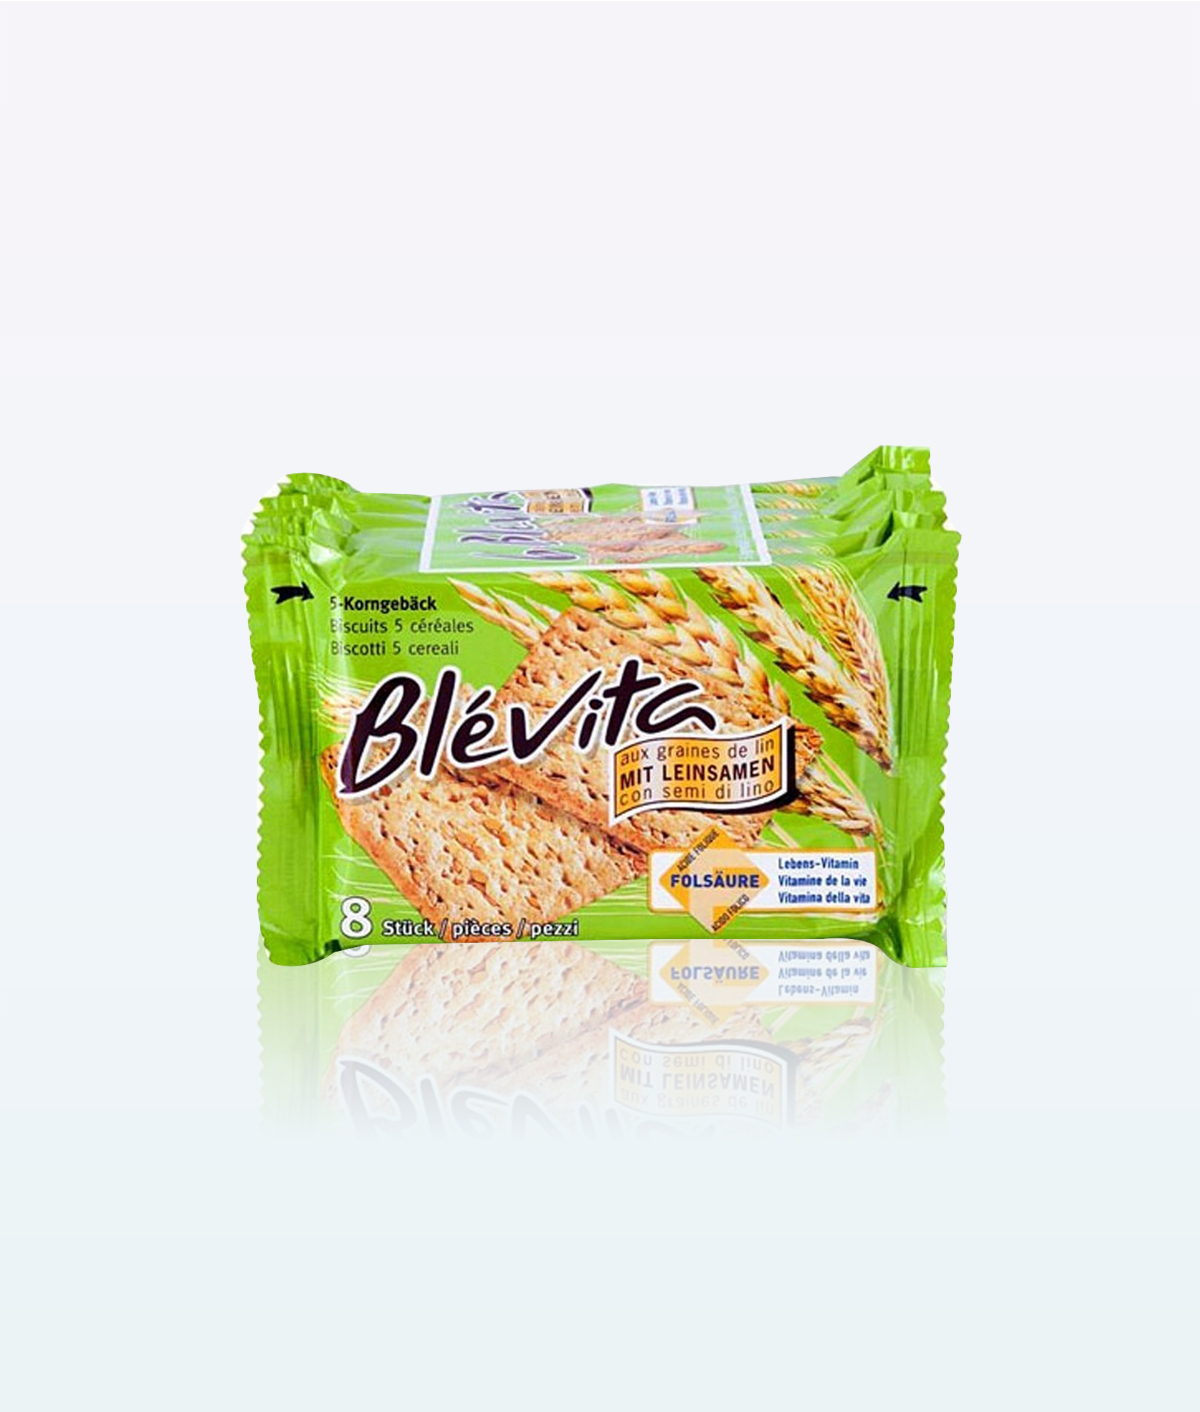 Blevita Biscuit Five Grains with Flax Seed 228g